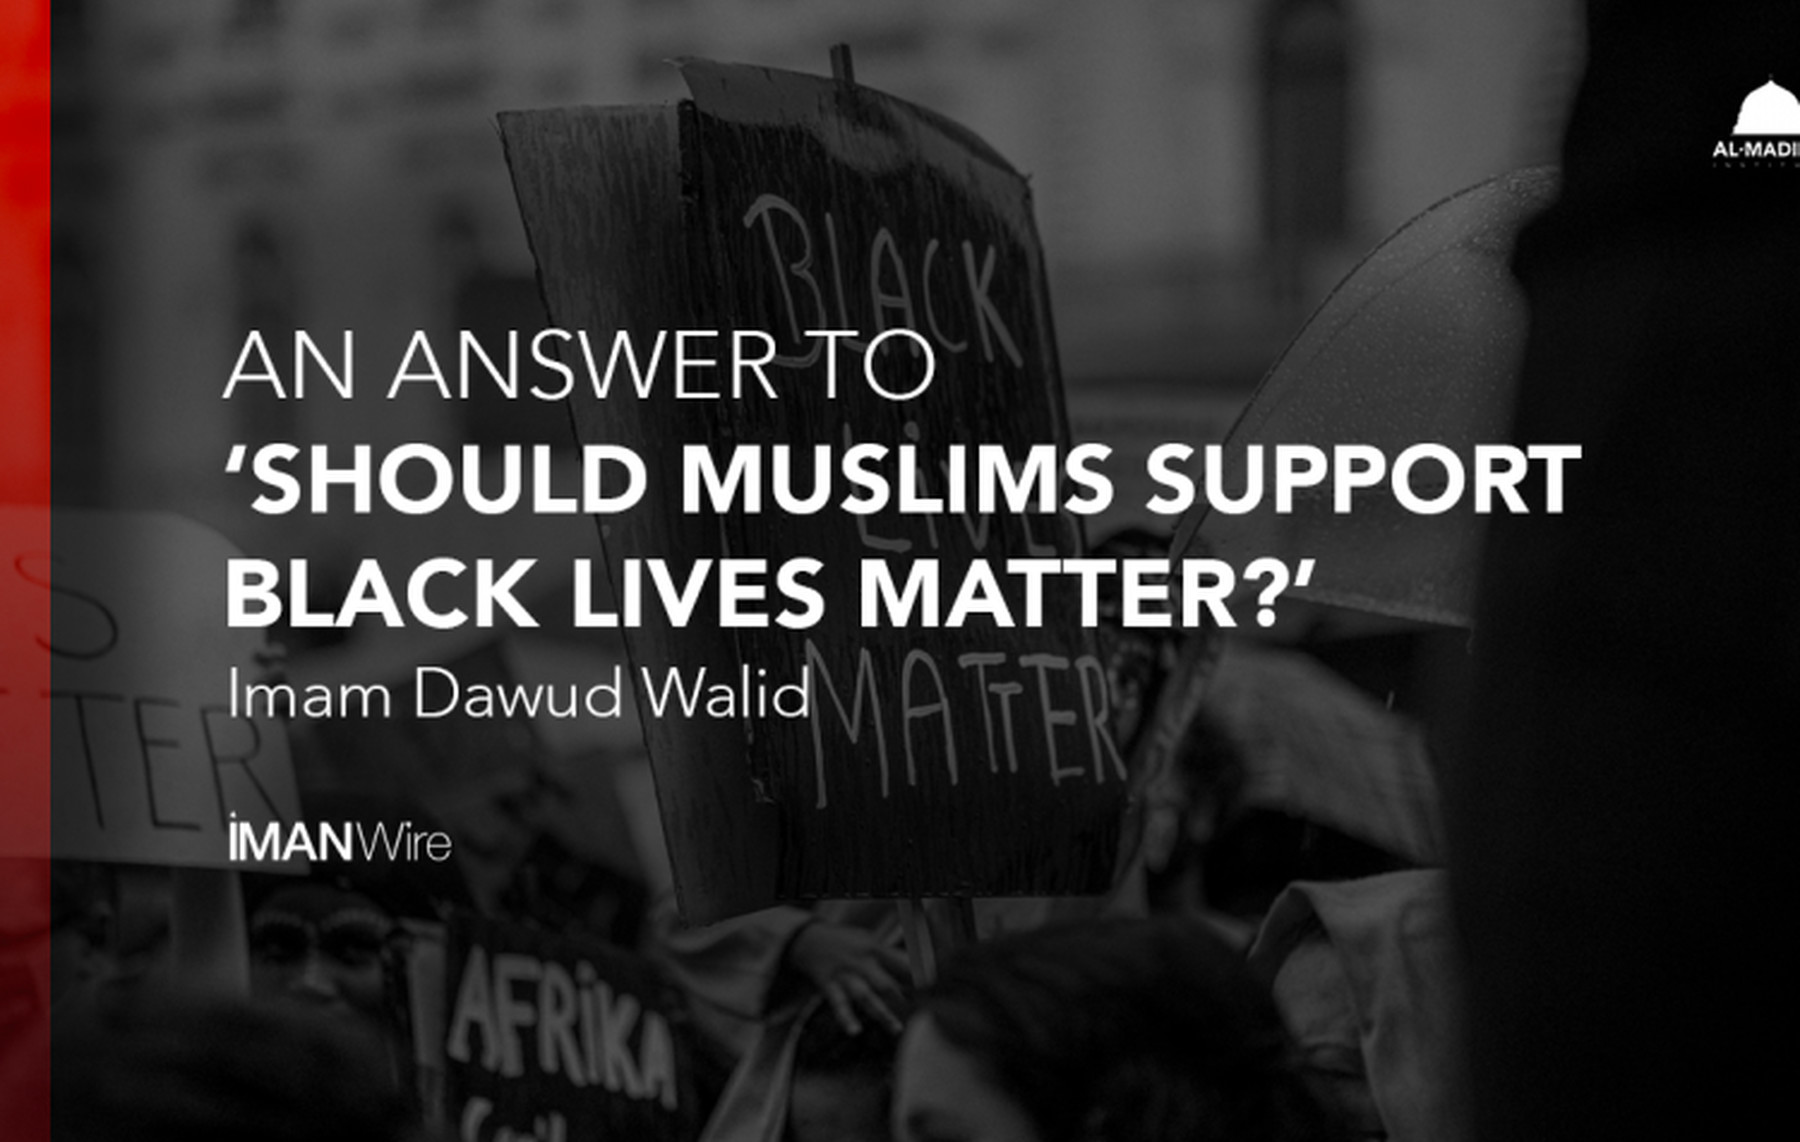 Web an answer to Yshould muslims support black lives matter Y 5 3 1200 x 700 750 476 c1